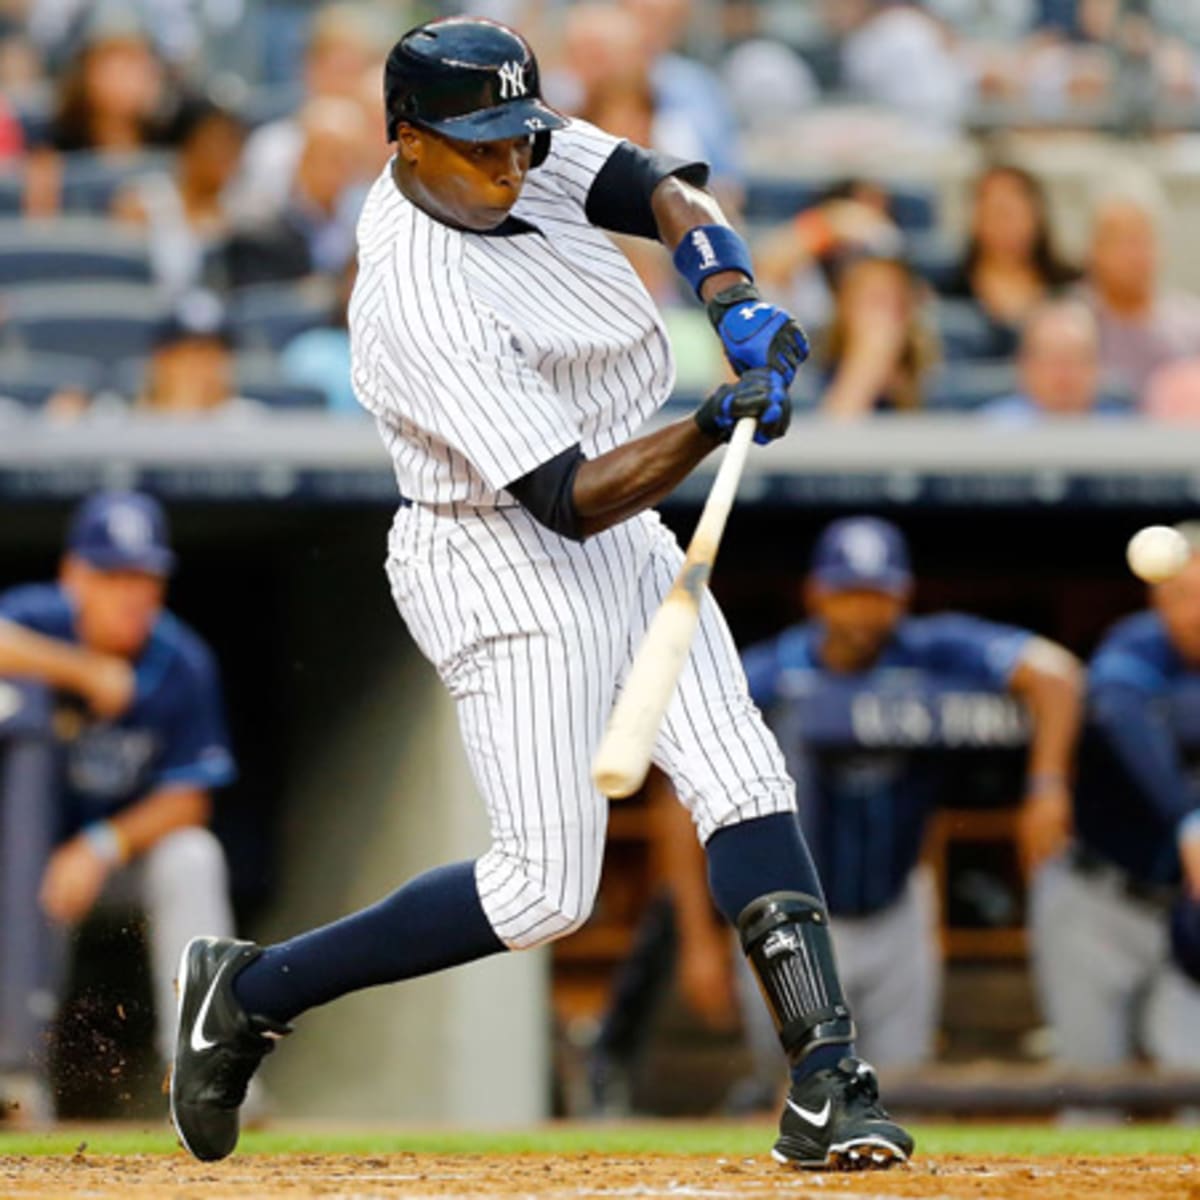 Alfonso Soriano's debut shows he's no Yankees savior - Sports Illustrated